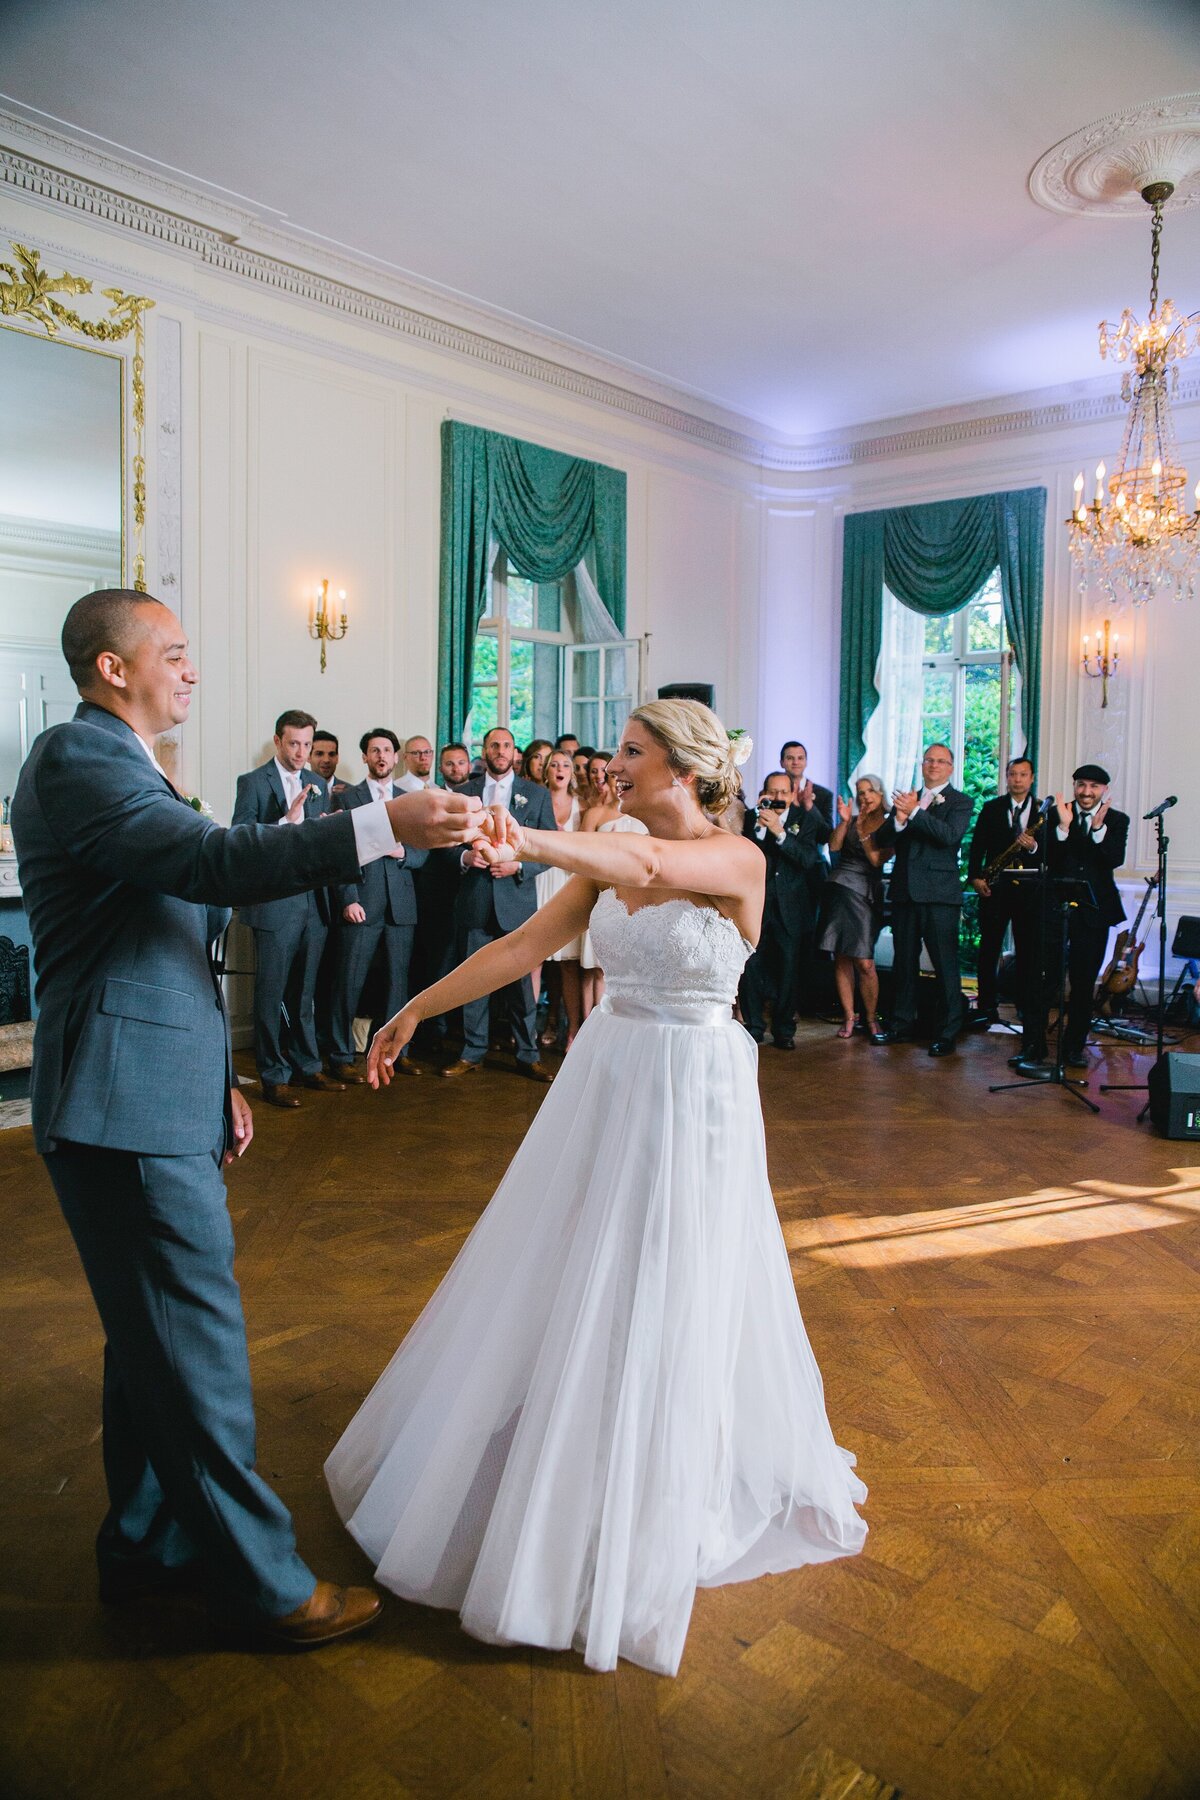 A wedding at Glen Manor House in Portsmouth, RI - 45